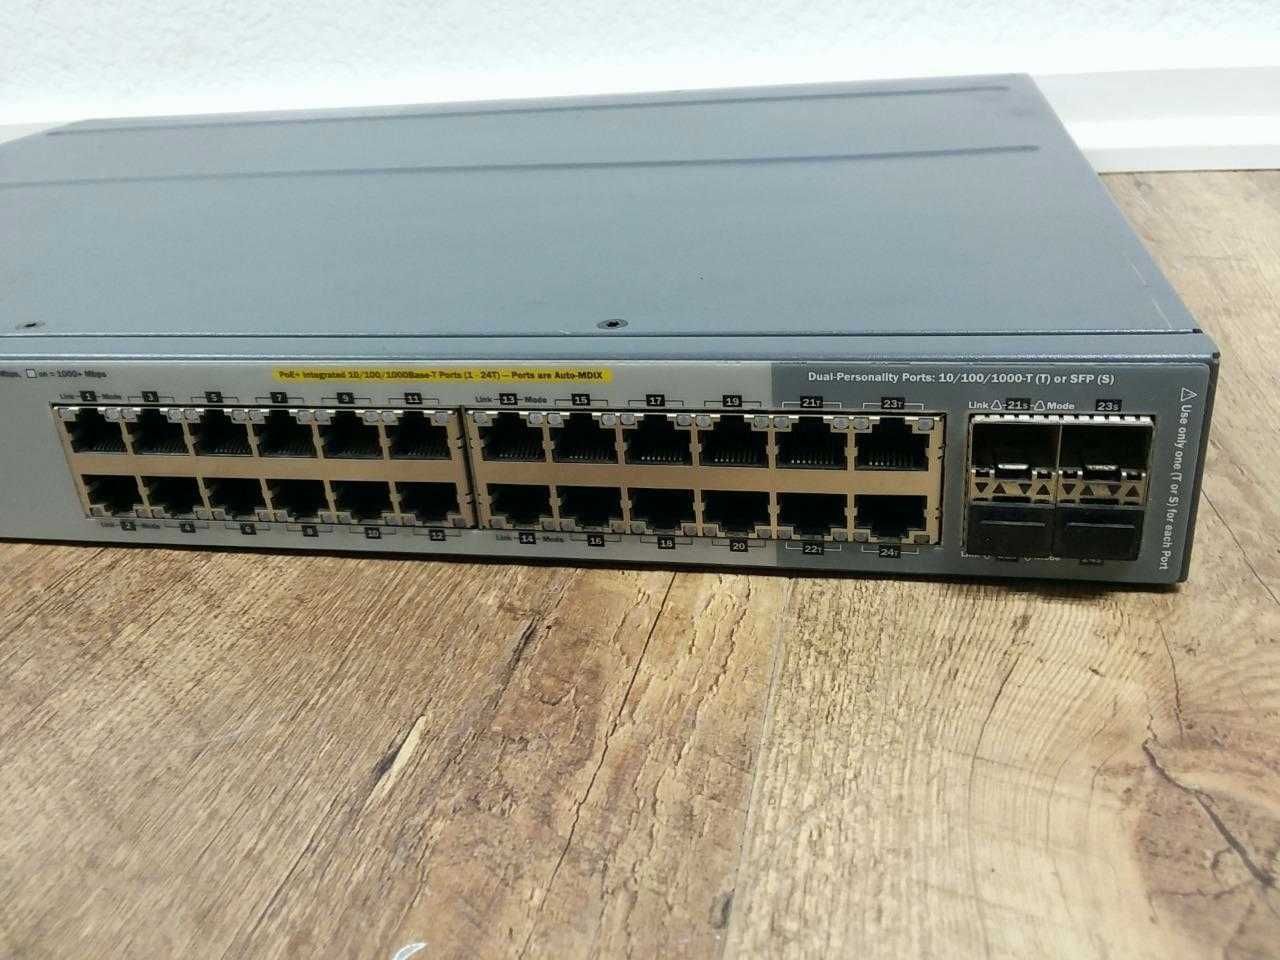 HP 2920-24G-POE+ Switch (J9727A), Gigabit, complet, functional